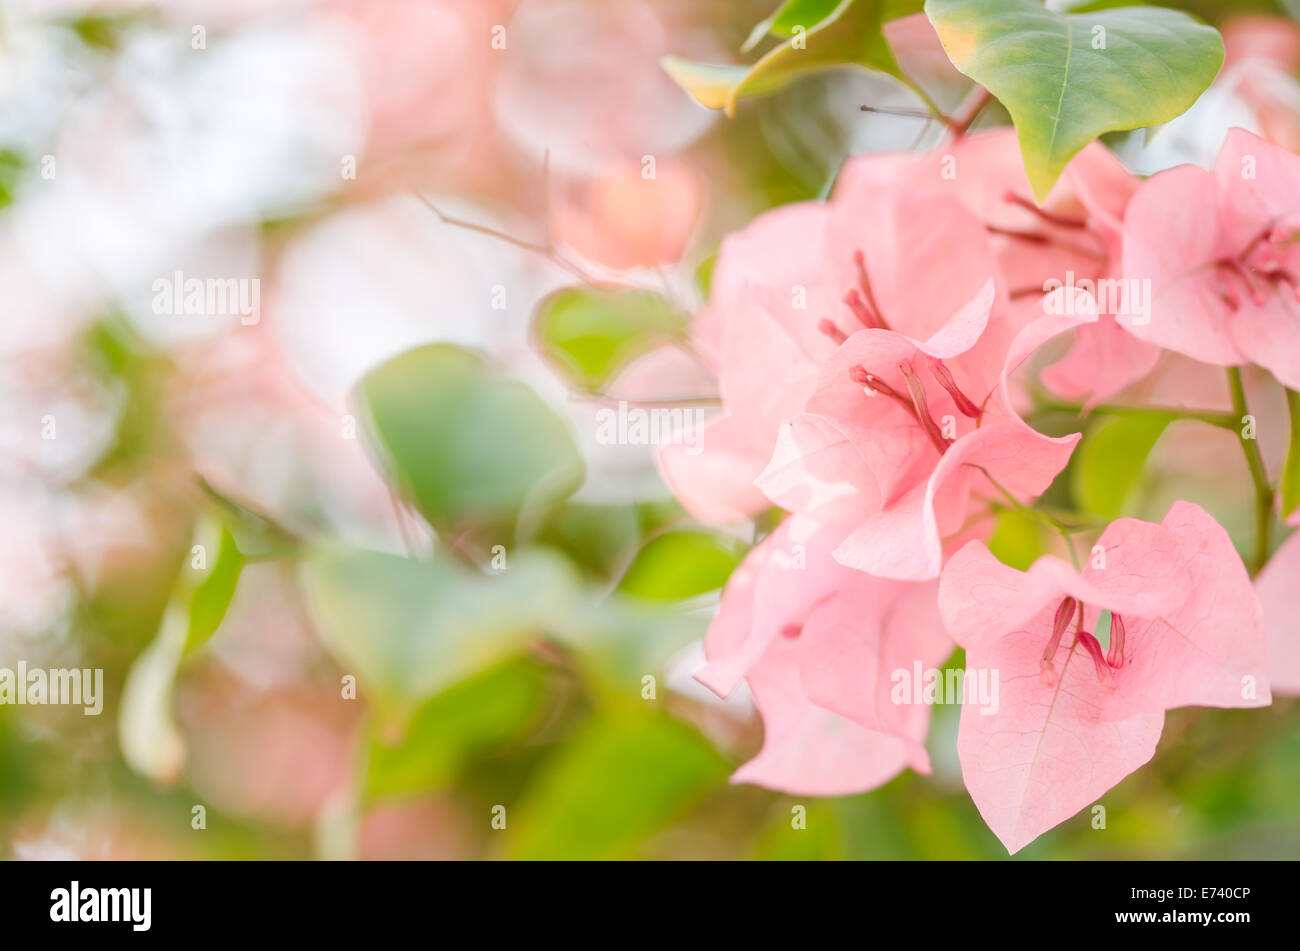 Paper flowers or Bougainvillea in the garden or nature park Stock Photo